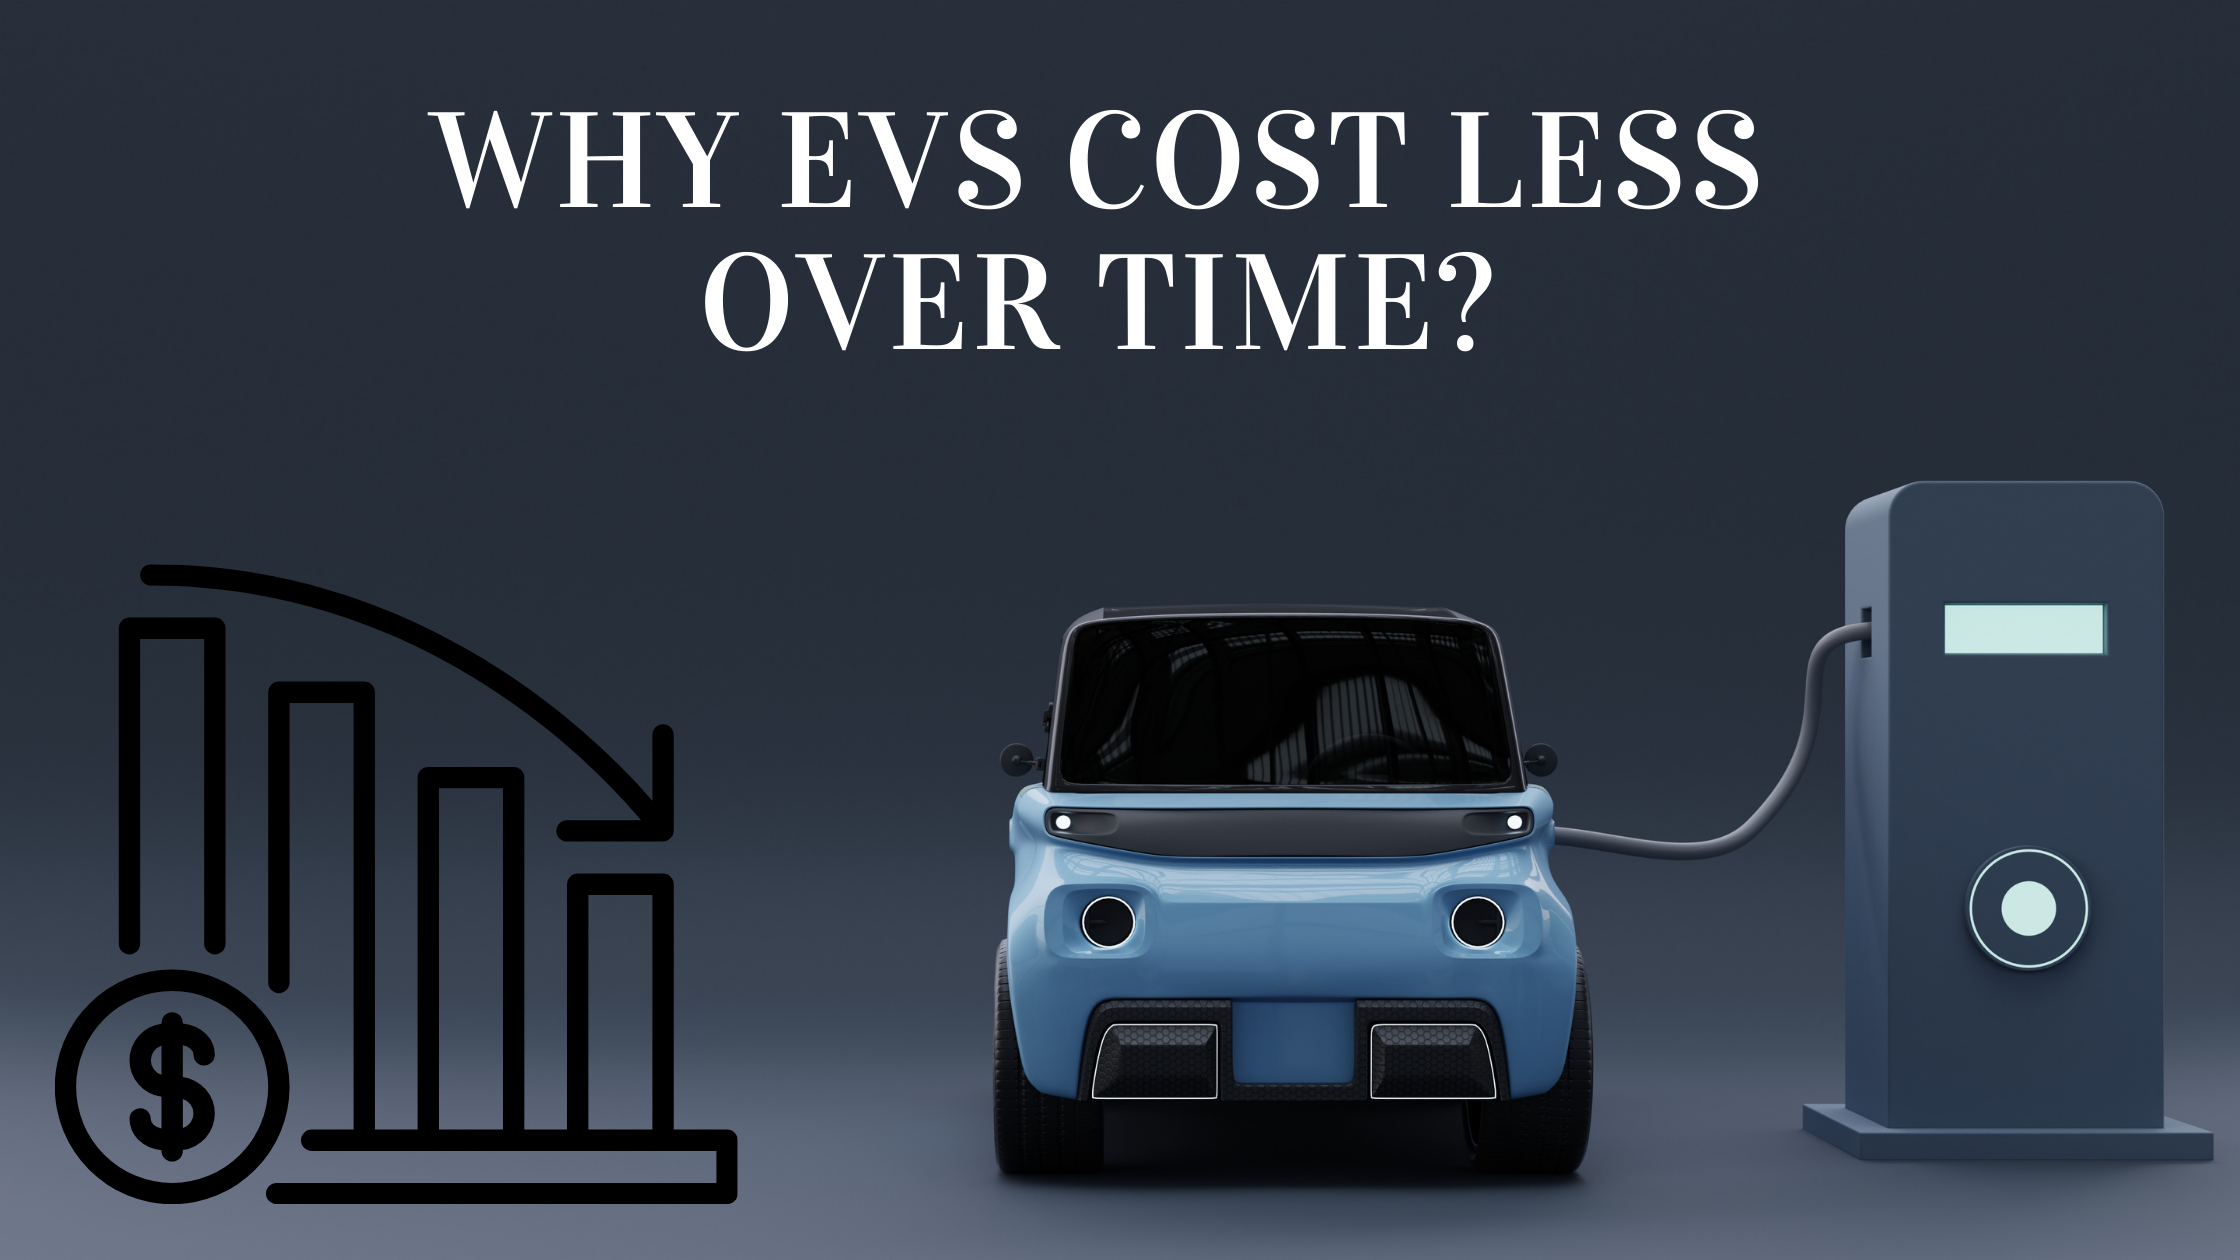 Saving $780 a Year by Going Electric